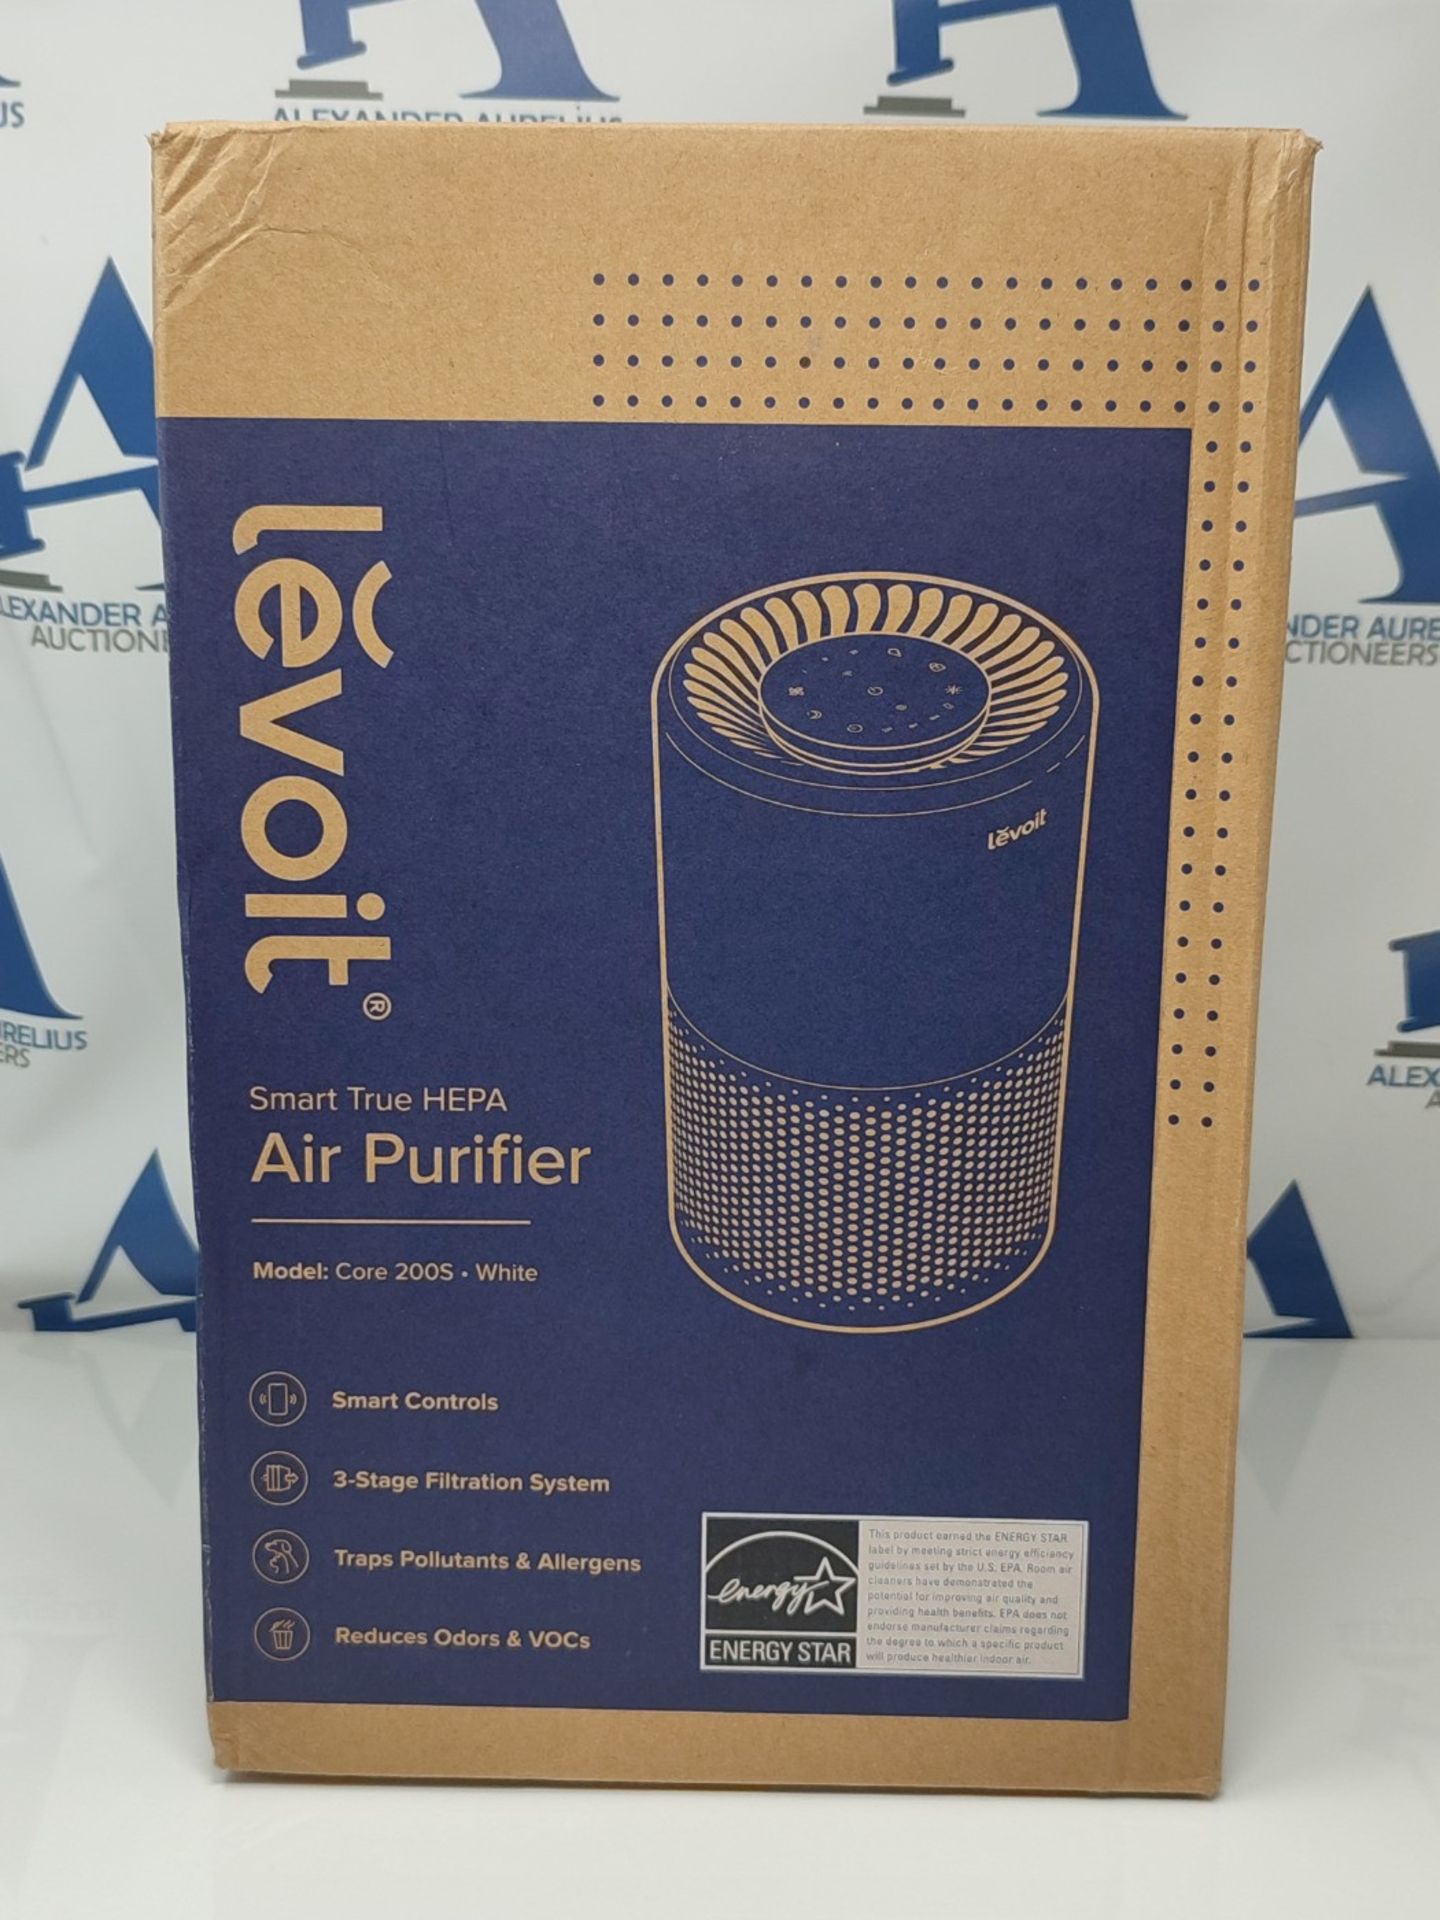 RRP £89.00 LEVOIT Smart WiFi Air Purifier for Home, Alexa Enabled H13 HEPA Filter, CADR 170m³/h, - Image 2 of 3